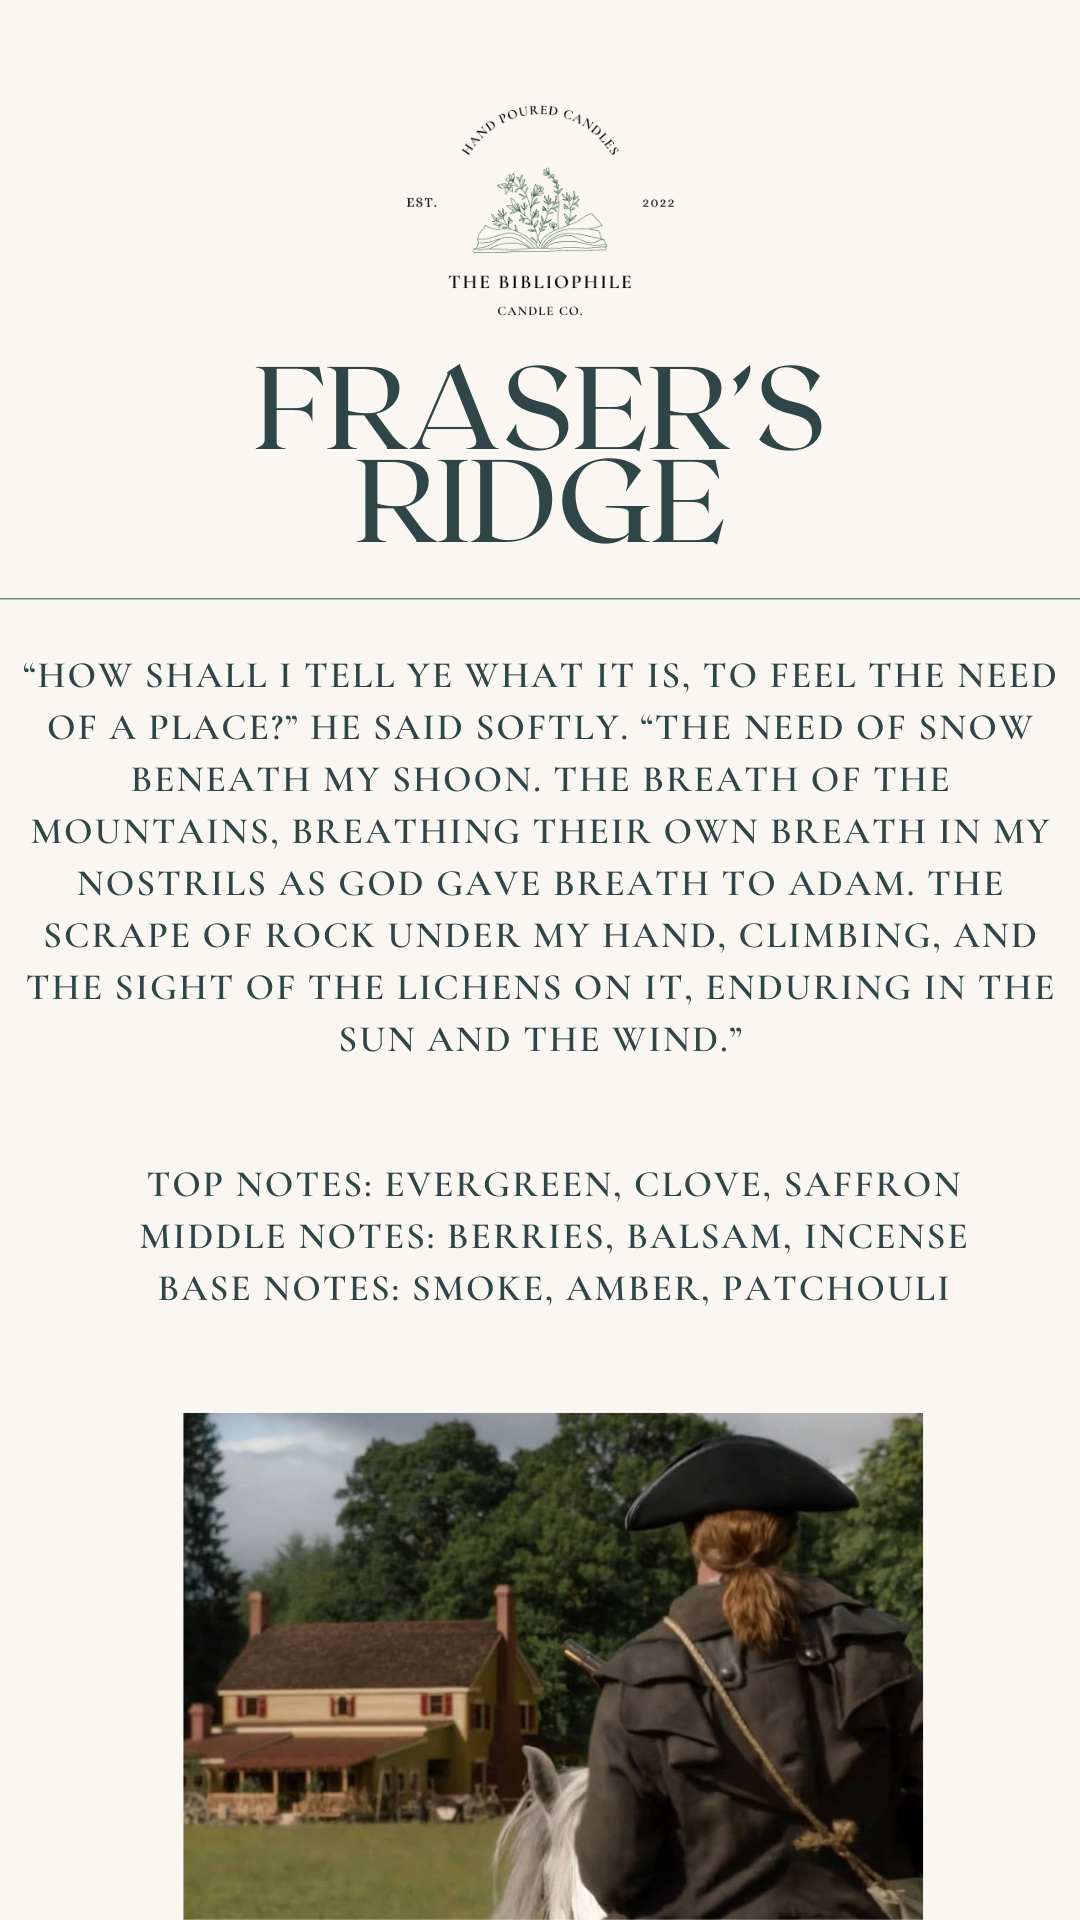 Fraser's Ridge Scented Candle